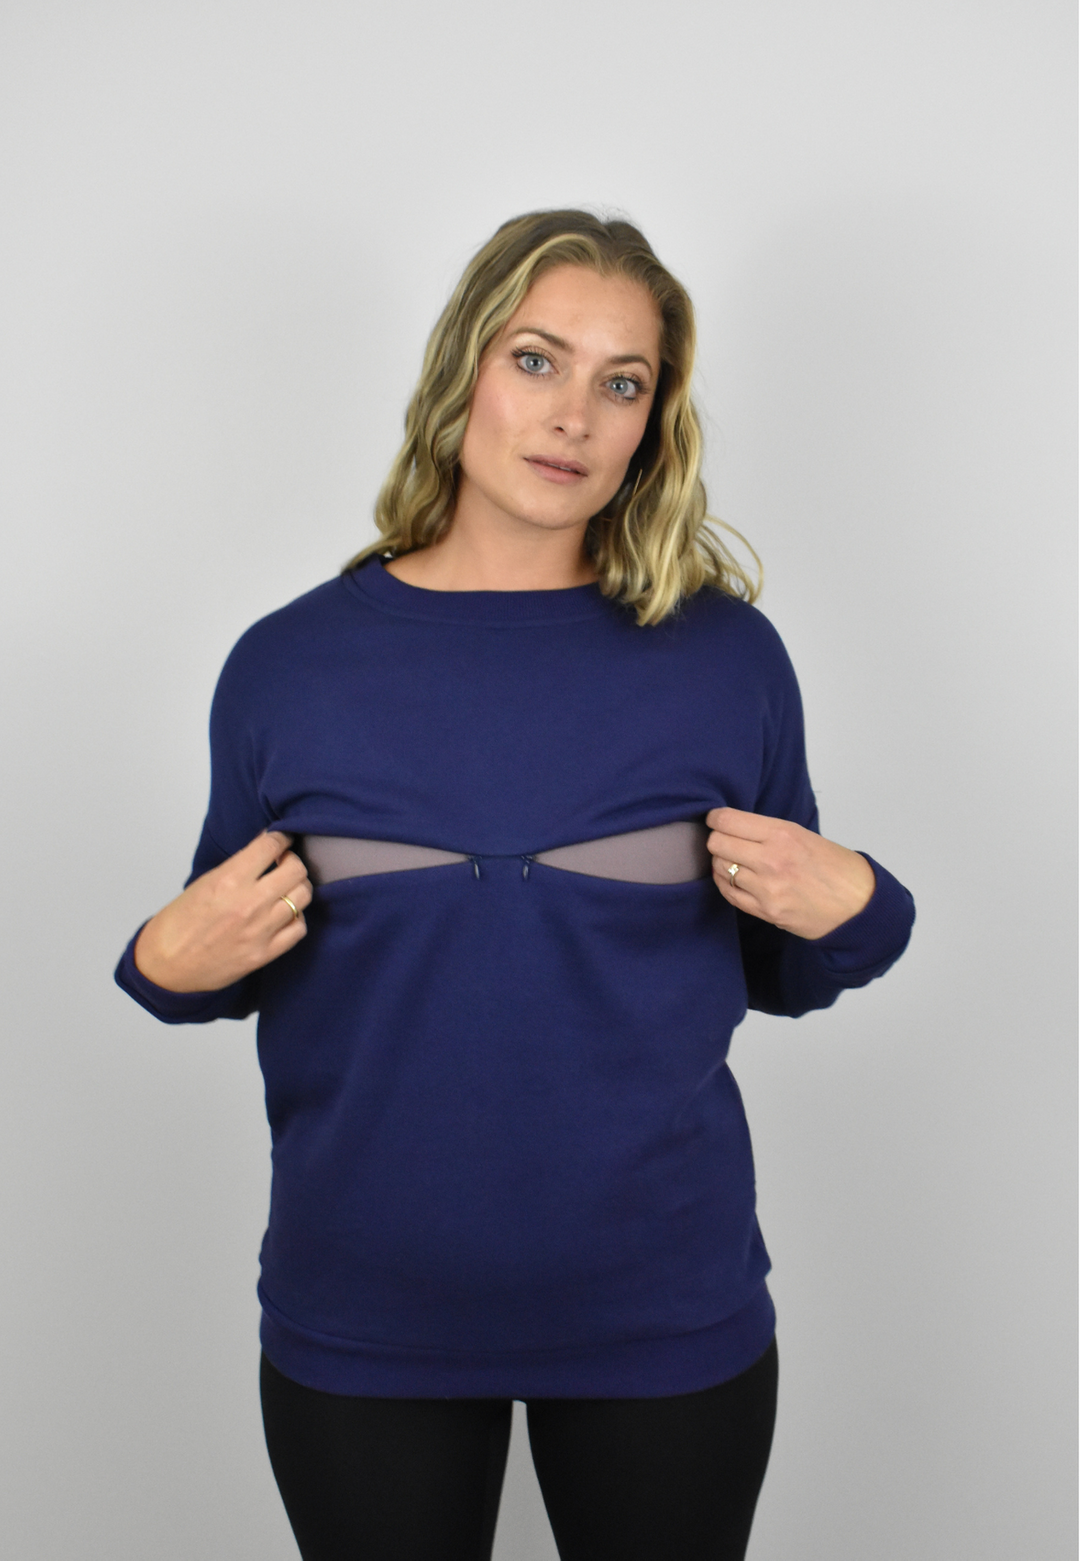 We have created this adorable pullover sweatshirt that's comfortable, maternity friendly, has easy nursing access from both sides.  Maternity clothing Canada.  Nursing clothing Canada. 